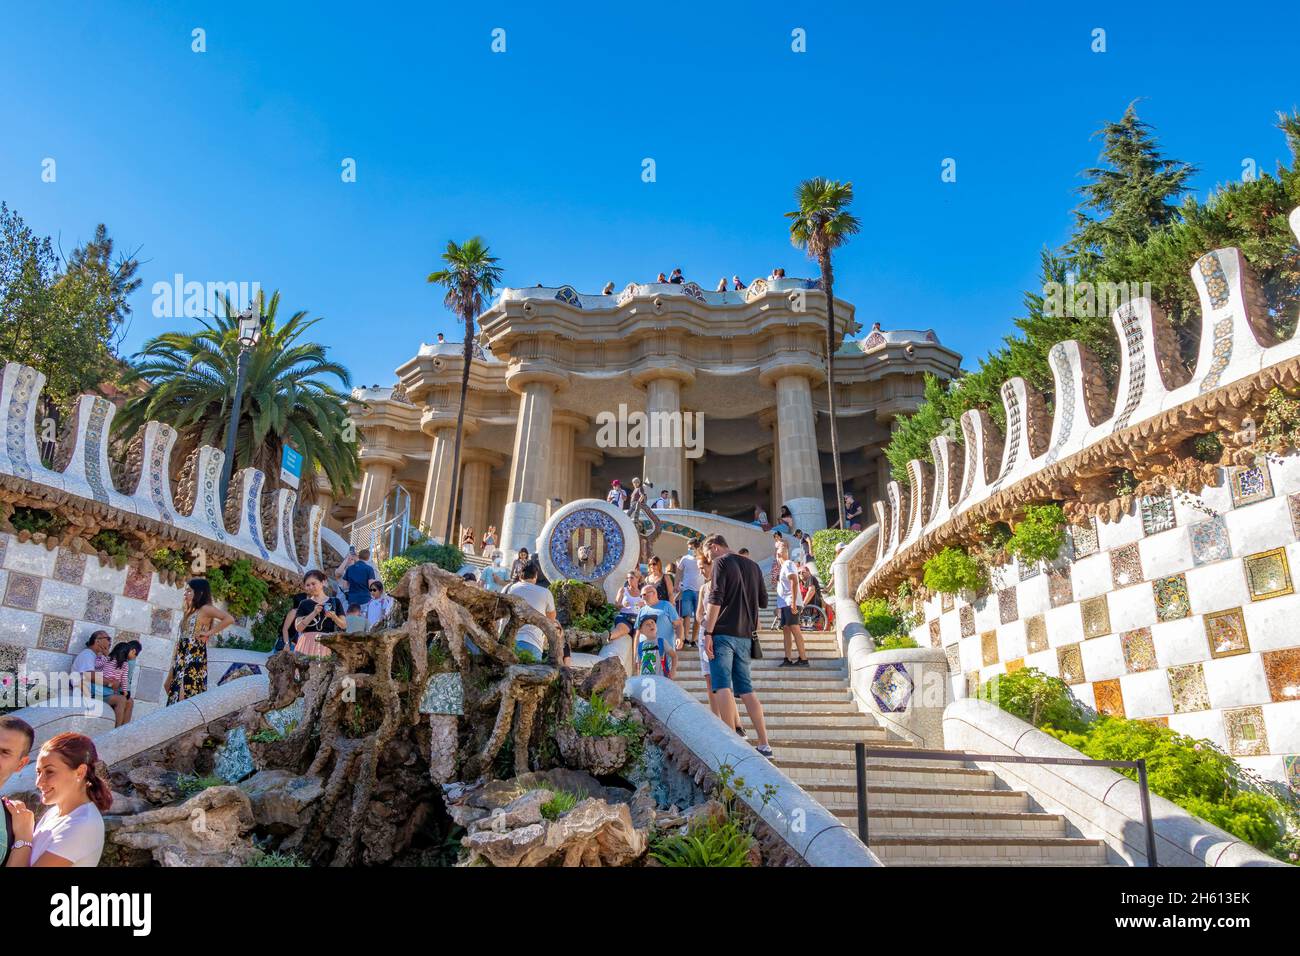 Barcelona, Spain - September 21, 2021: The famous stairs of Parc Güell ...